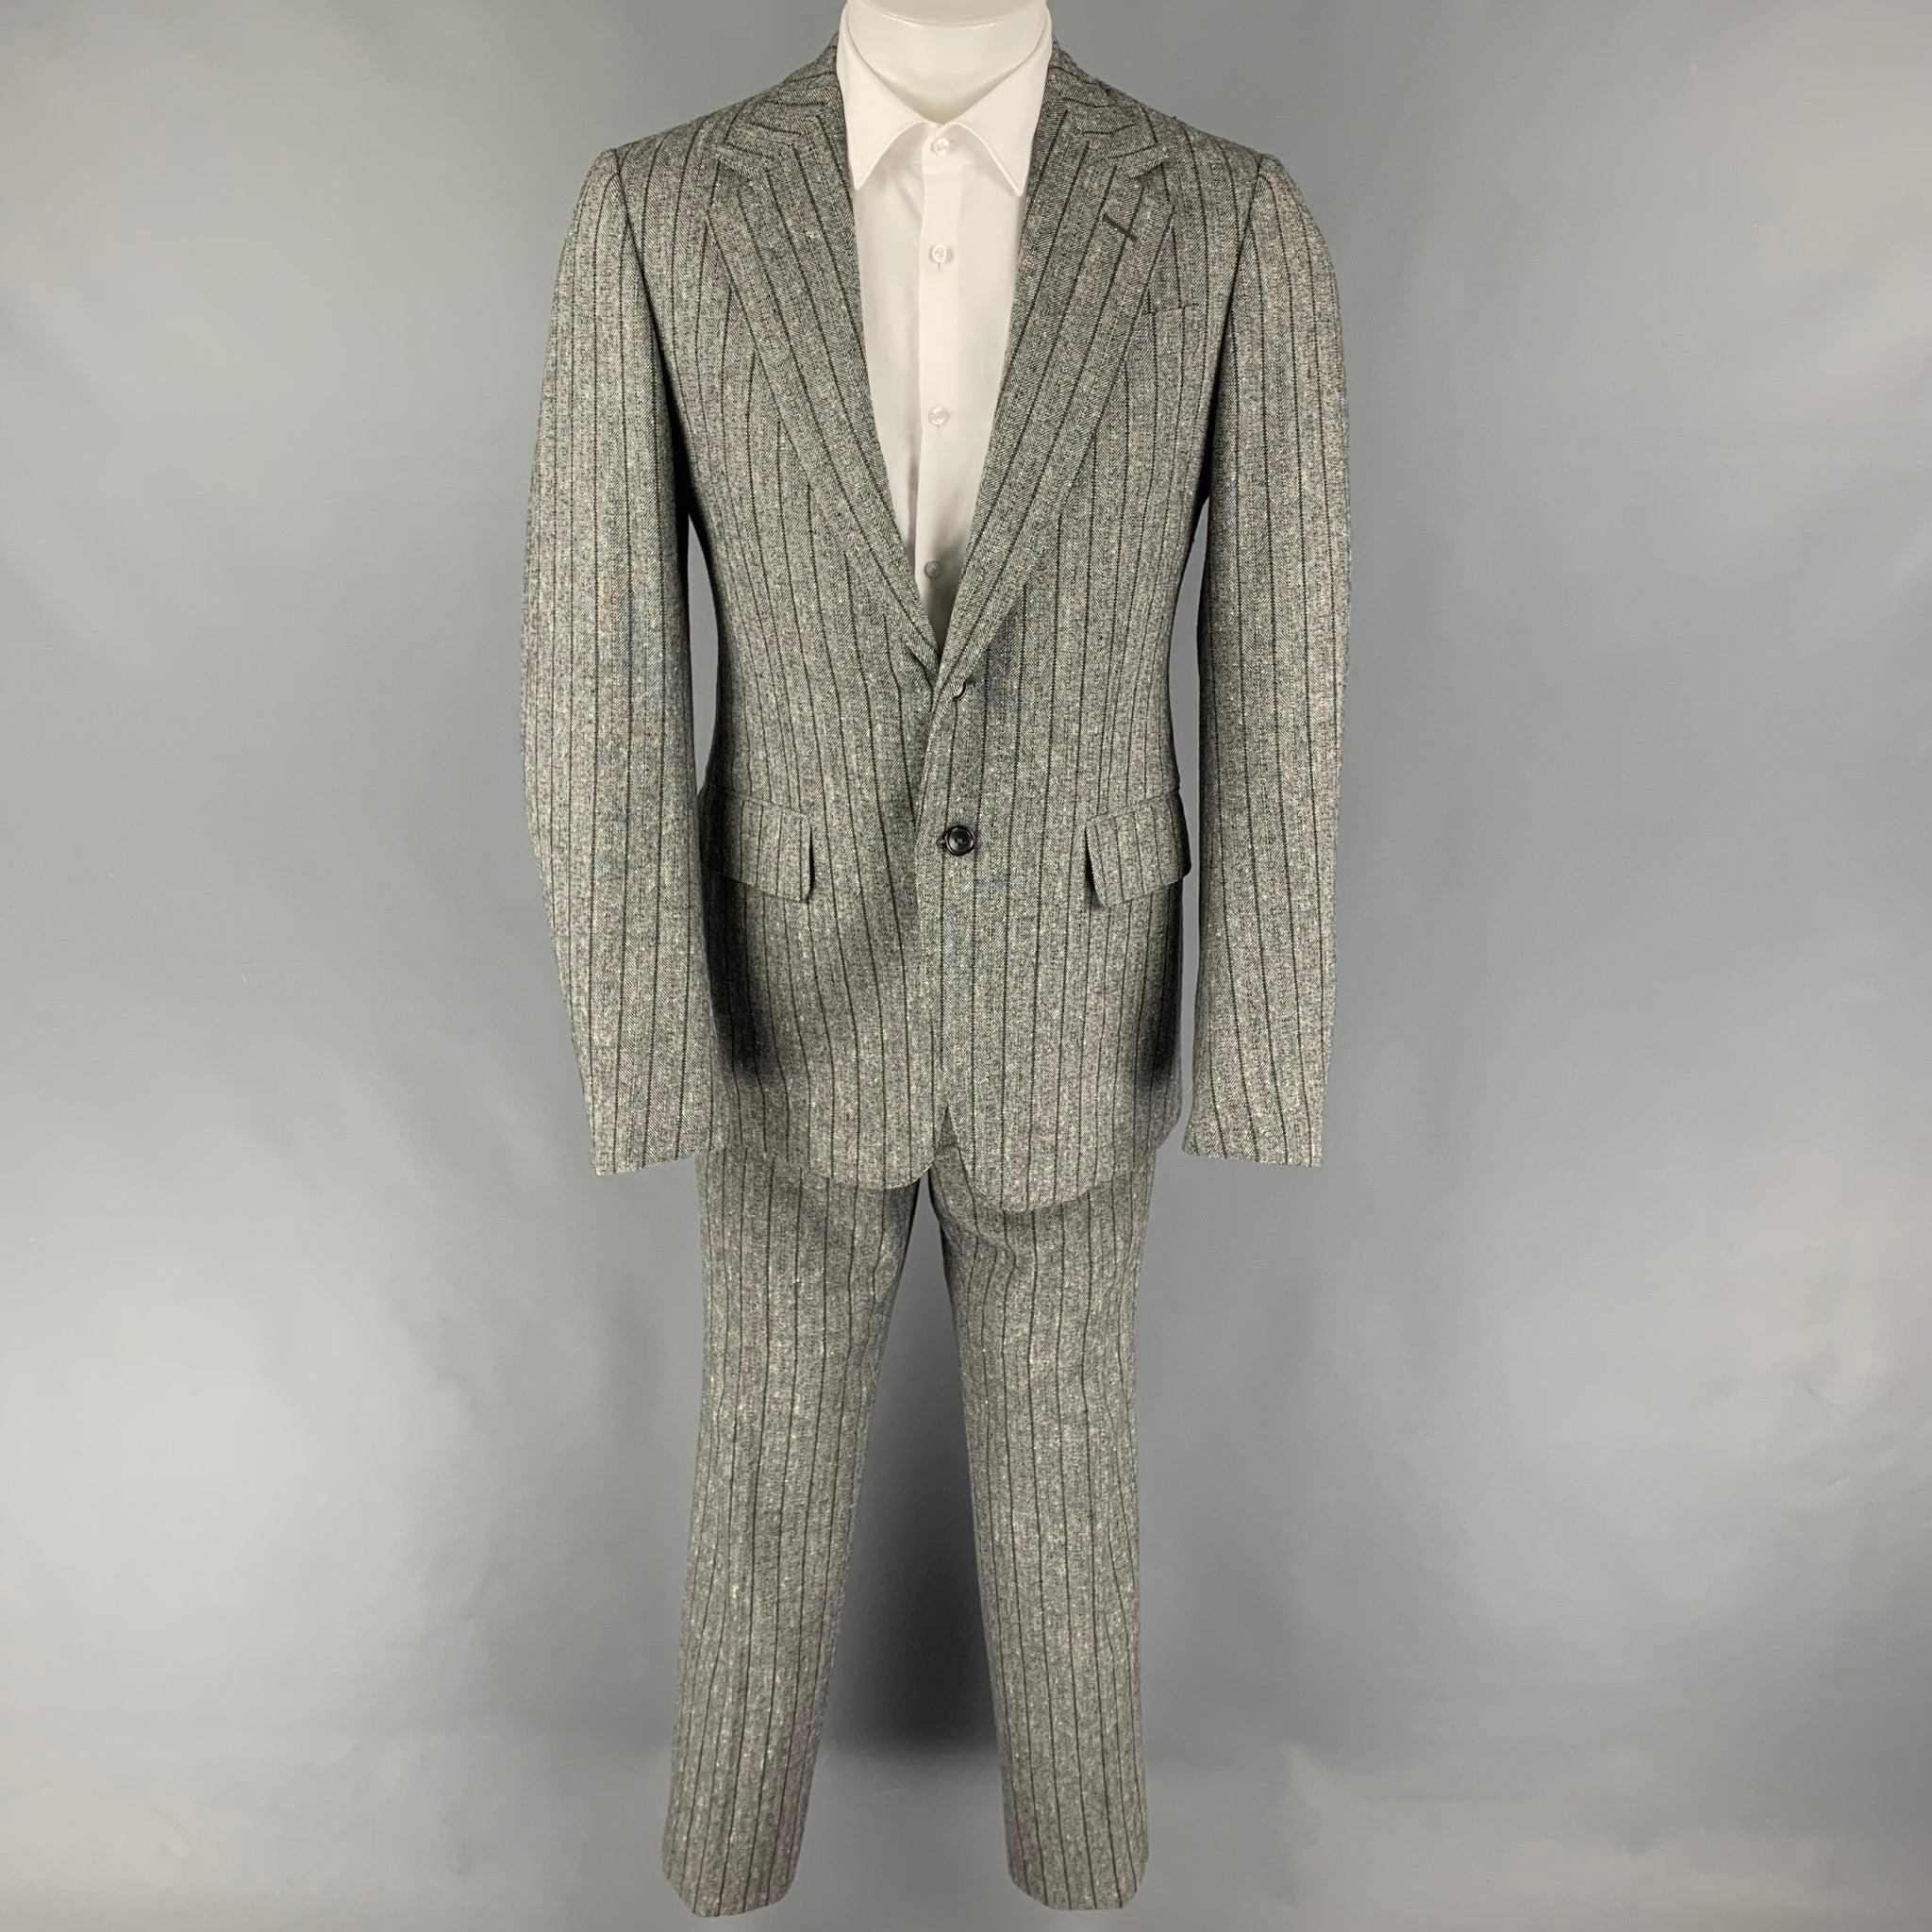 GUCCI
suit comes in
 a grey stripe wool blend with a full liner and includes a breasted, double button sport coat with a notch lapel and matching flat front trousers. Made in Italy. Very Good Pre-Owned Condition. 

Marked:   48 R  

Measurements: 
 